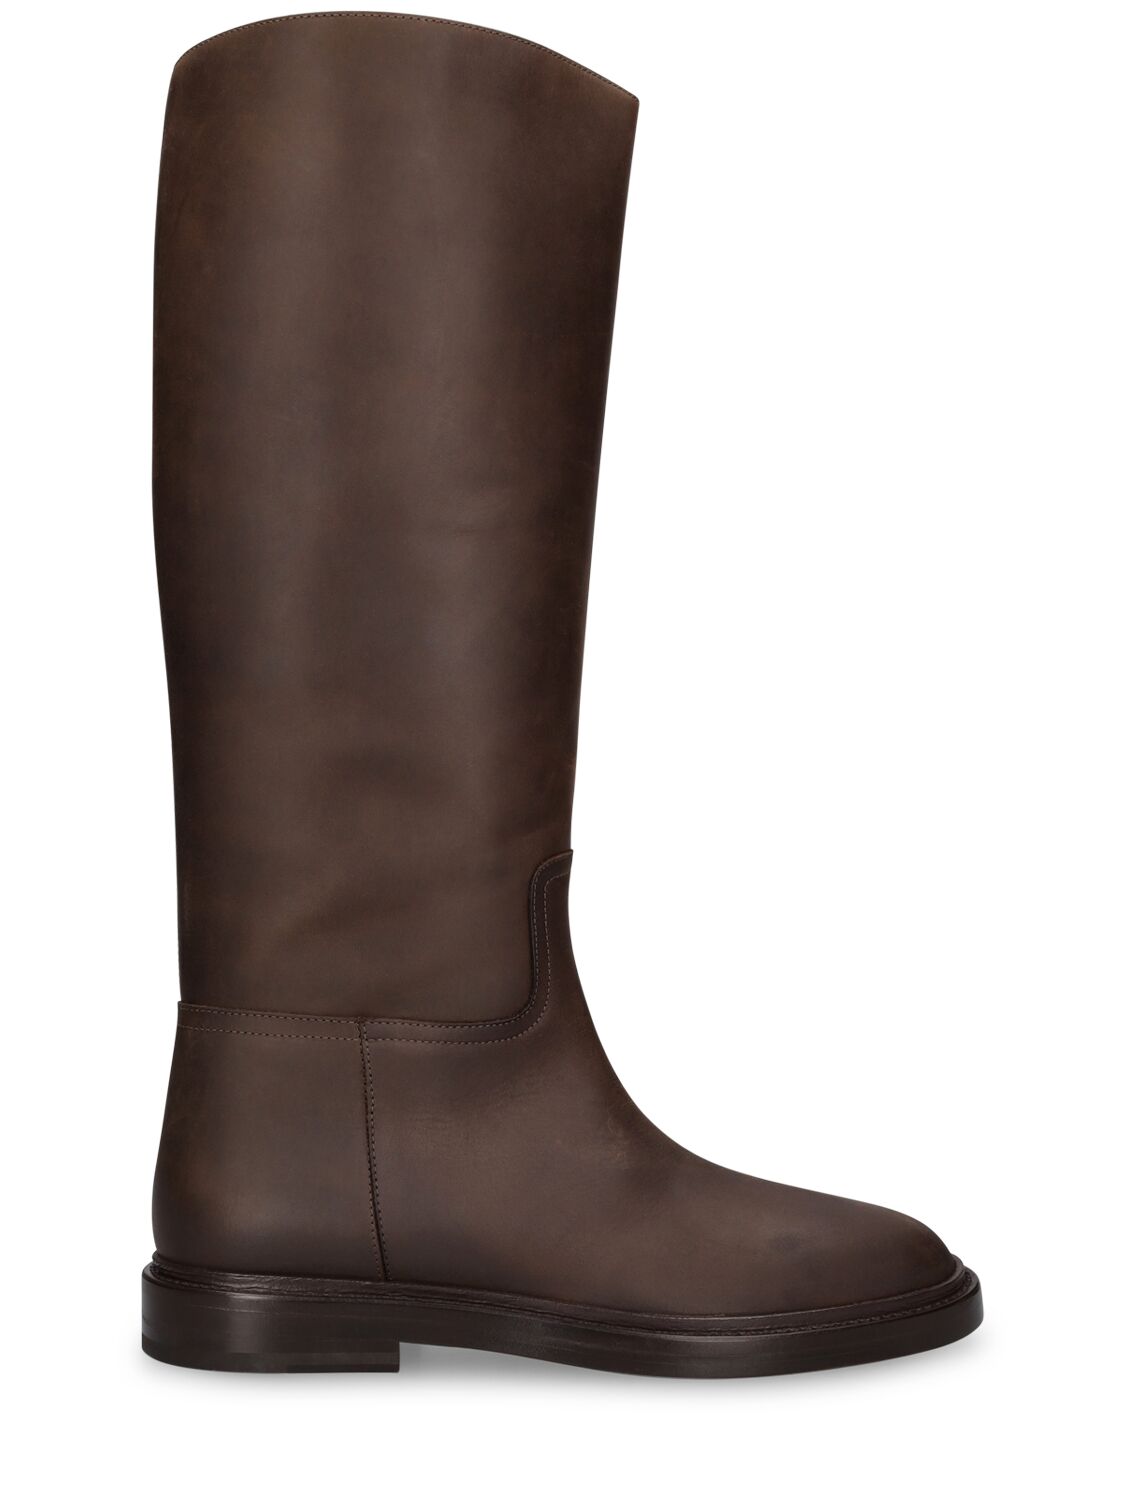 30mm Leather Tall Boots